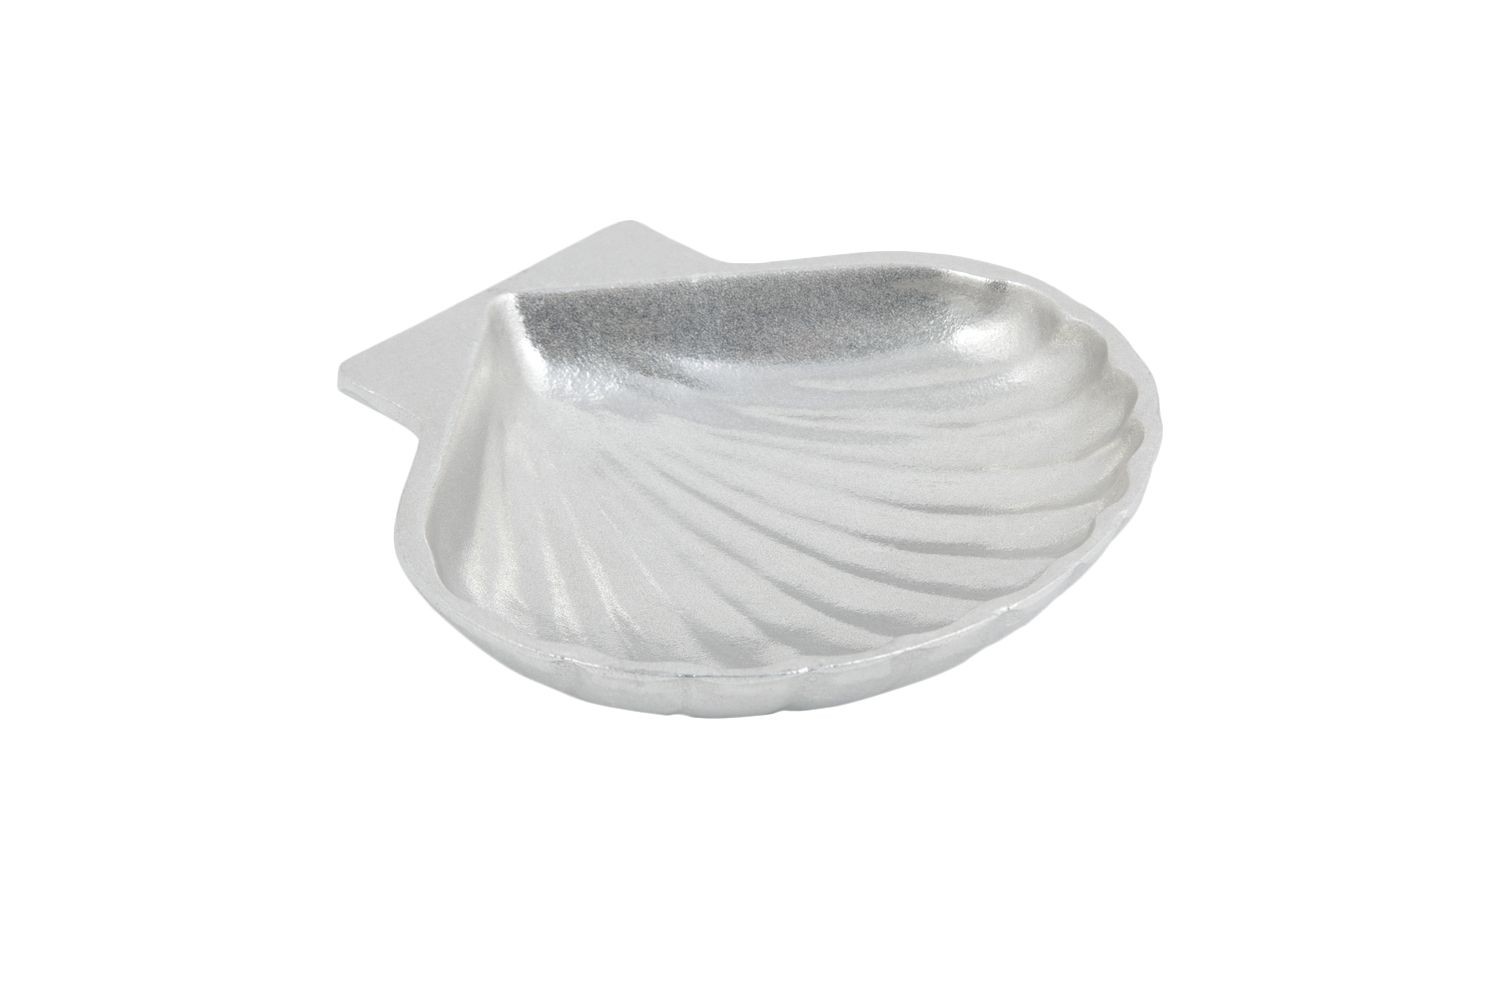 Bon Chef 5040P Clam Shell Dish, Pewter Glo 6 1/8" x 6 3/8", Set of 6